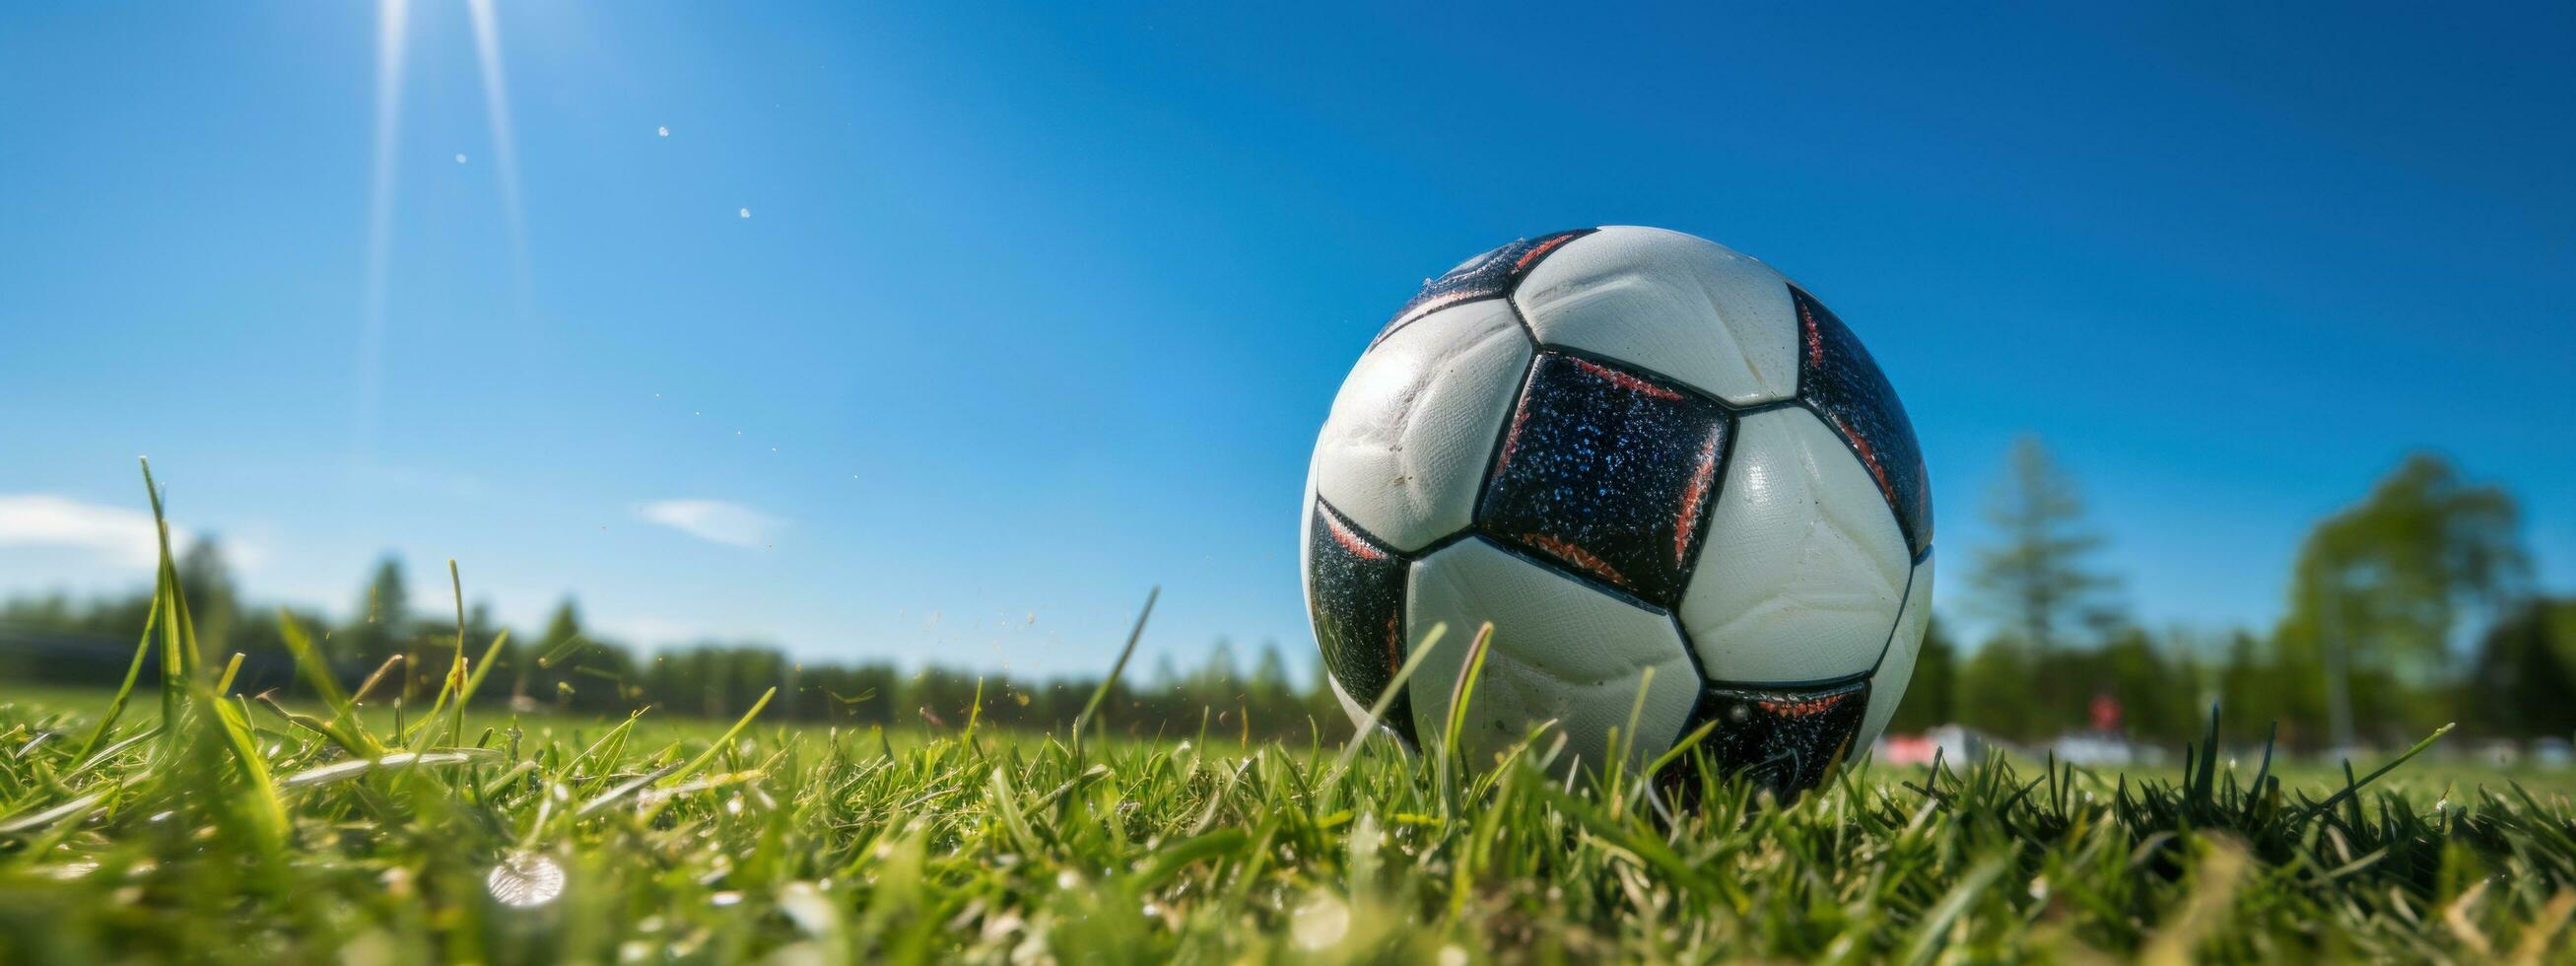 AI generated soccer ball with goalie on grassy field photo